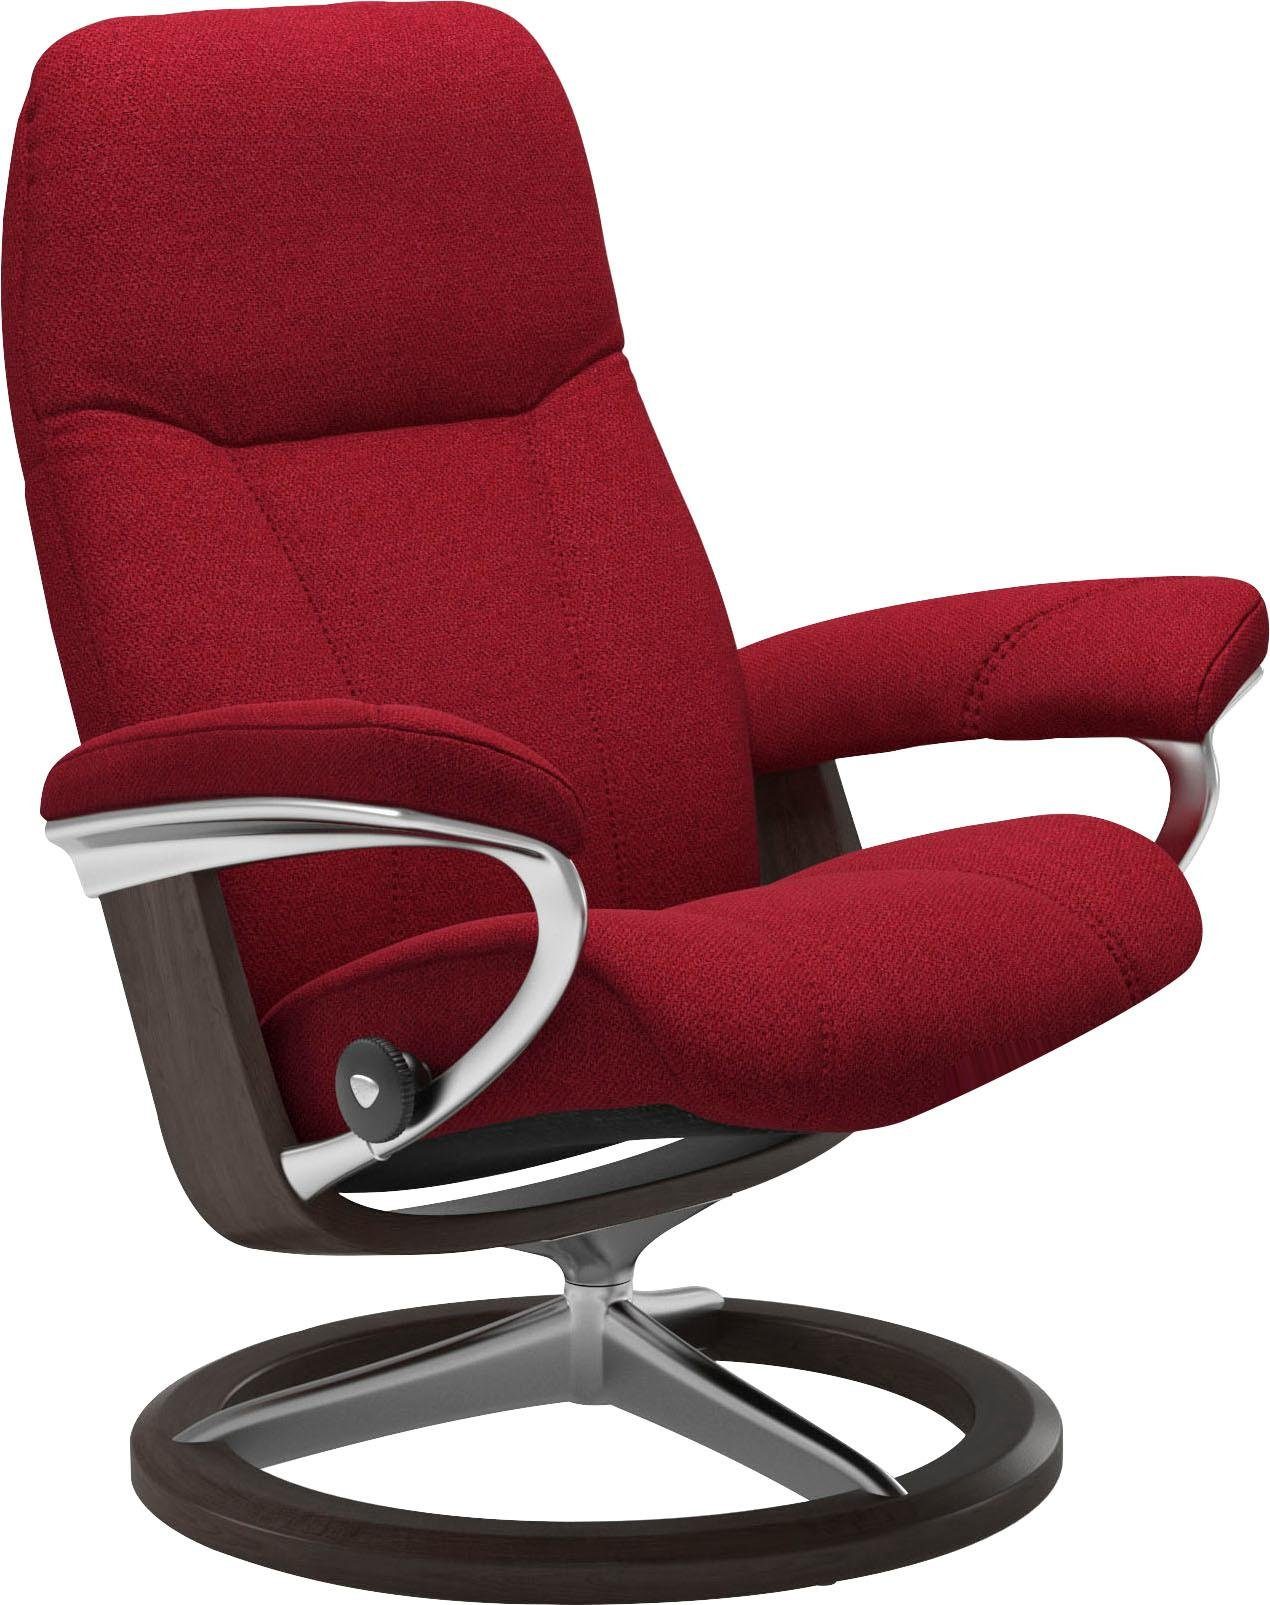 Base, Relaxsessel Gestell Signature Consul, Stressless® Größe mit S, Wenge